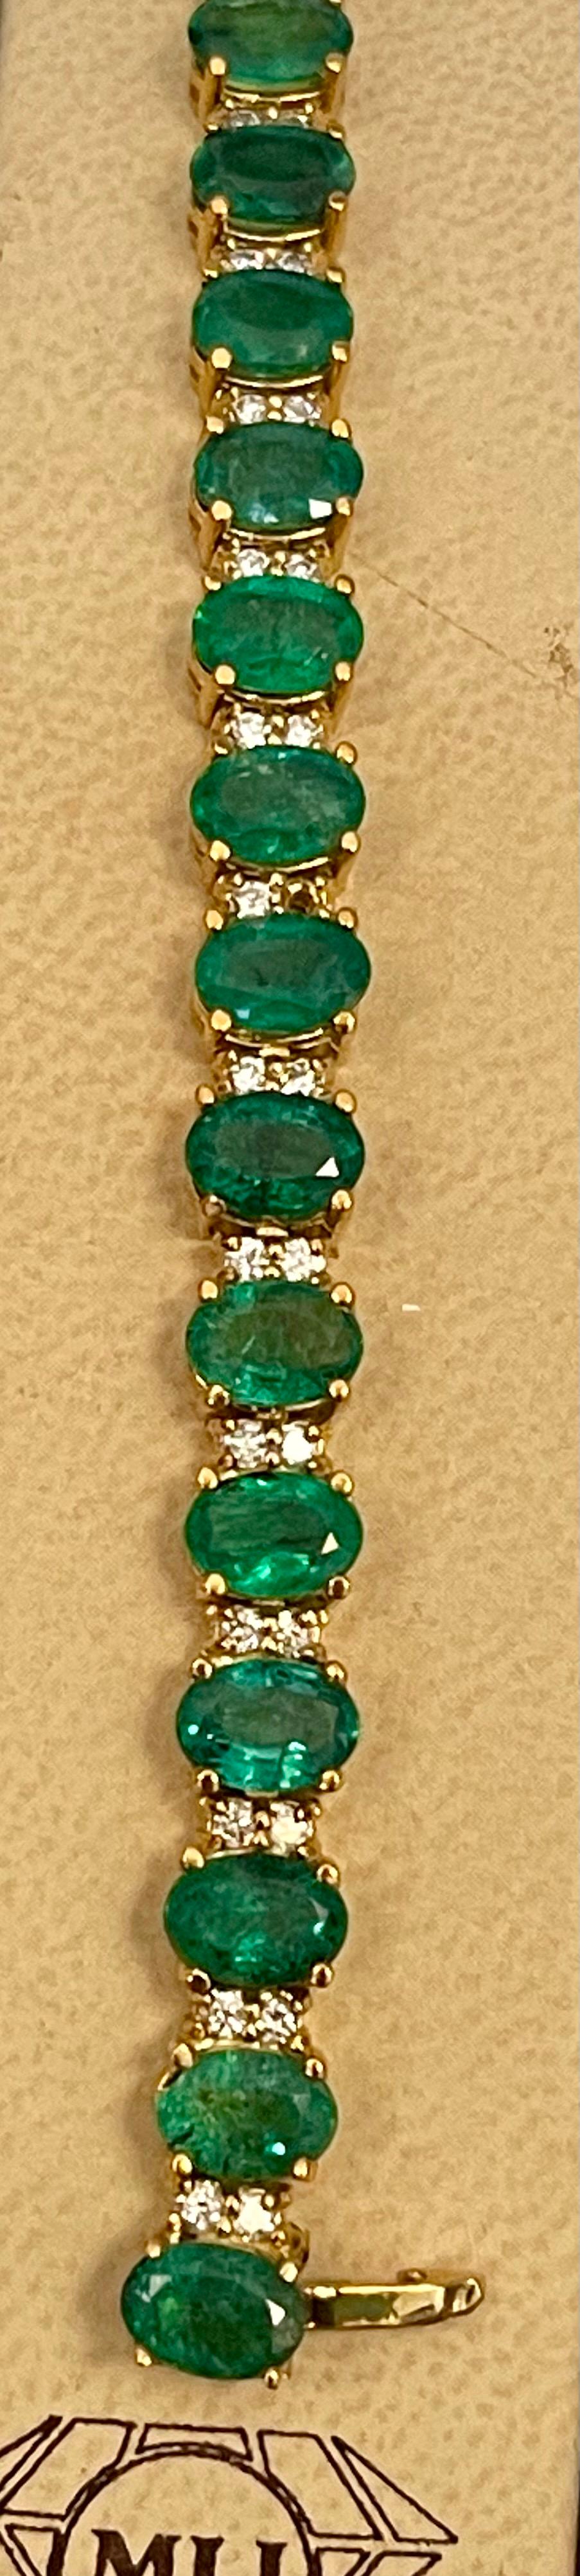 12 Carat Natural Emerald & 2.8 Carat Diamond Tennis Bracelet 14 Kt Yellow Gold In New Condition For Sale In New York, NY